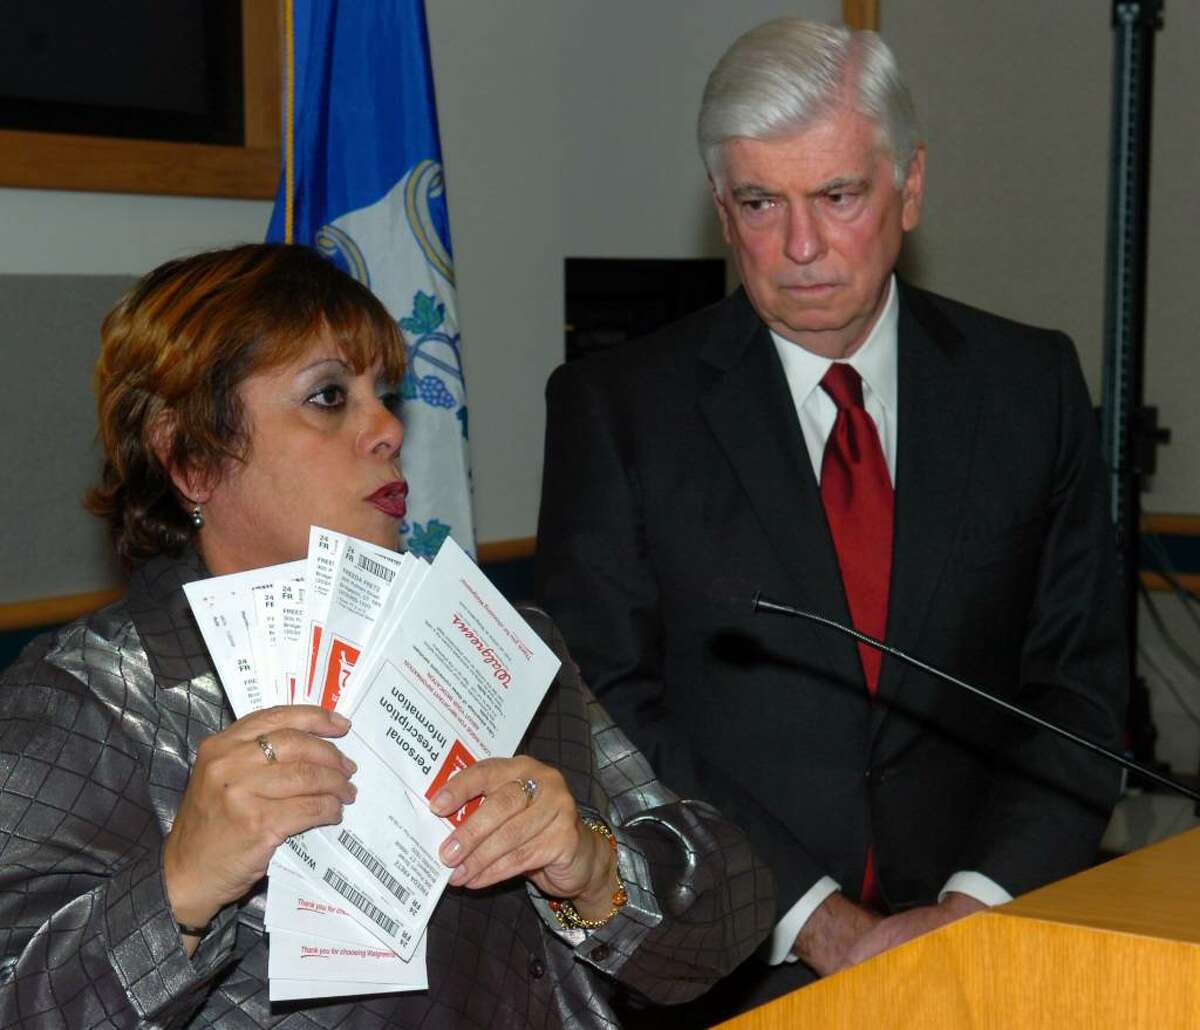 Sen. Christopher Dodd listens as Freeda Fretz, of Bridgeport, talks about her struggles with health care costs during a forum on health care reform legislation, held at Bridgeport Hospital, in Bridgeport, Conn. on Friday, Oct. 30th, 2009. Fretz, a cancer survivor, holds receipts for just a month's worth of medicine that she has paid for to treat her chronic asthma.